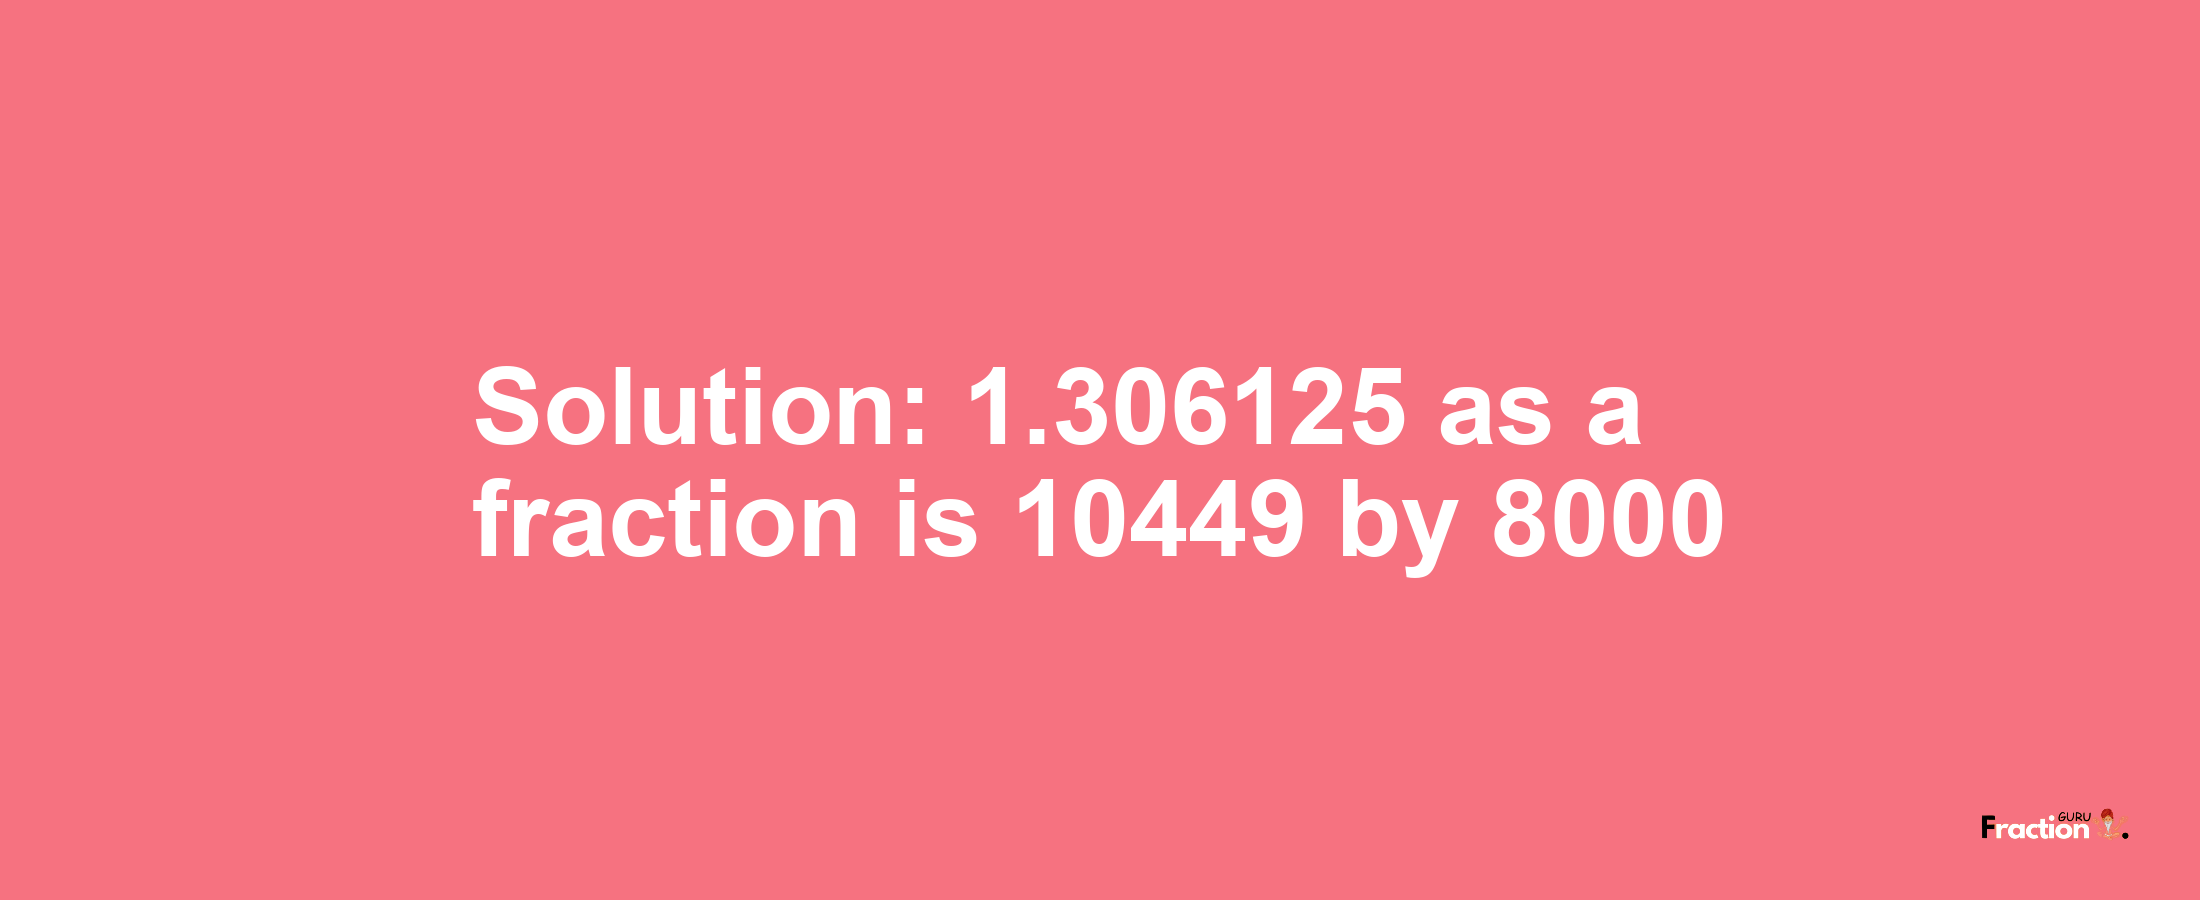 Solution:1.306125 as a fraction is 10449/8000